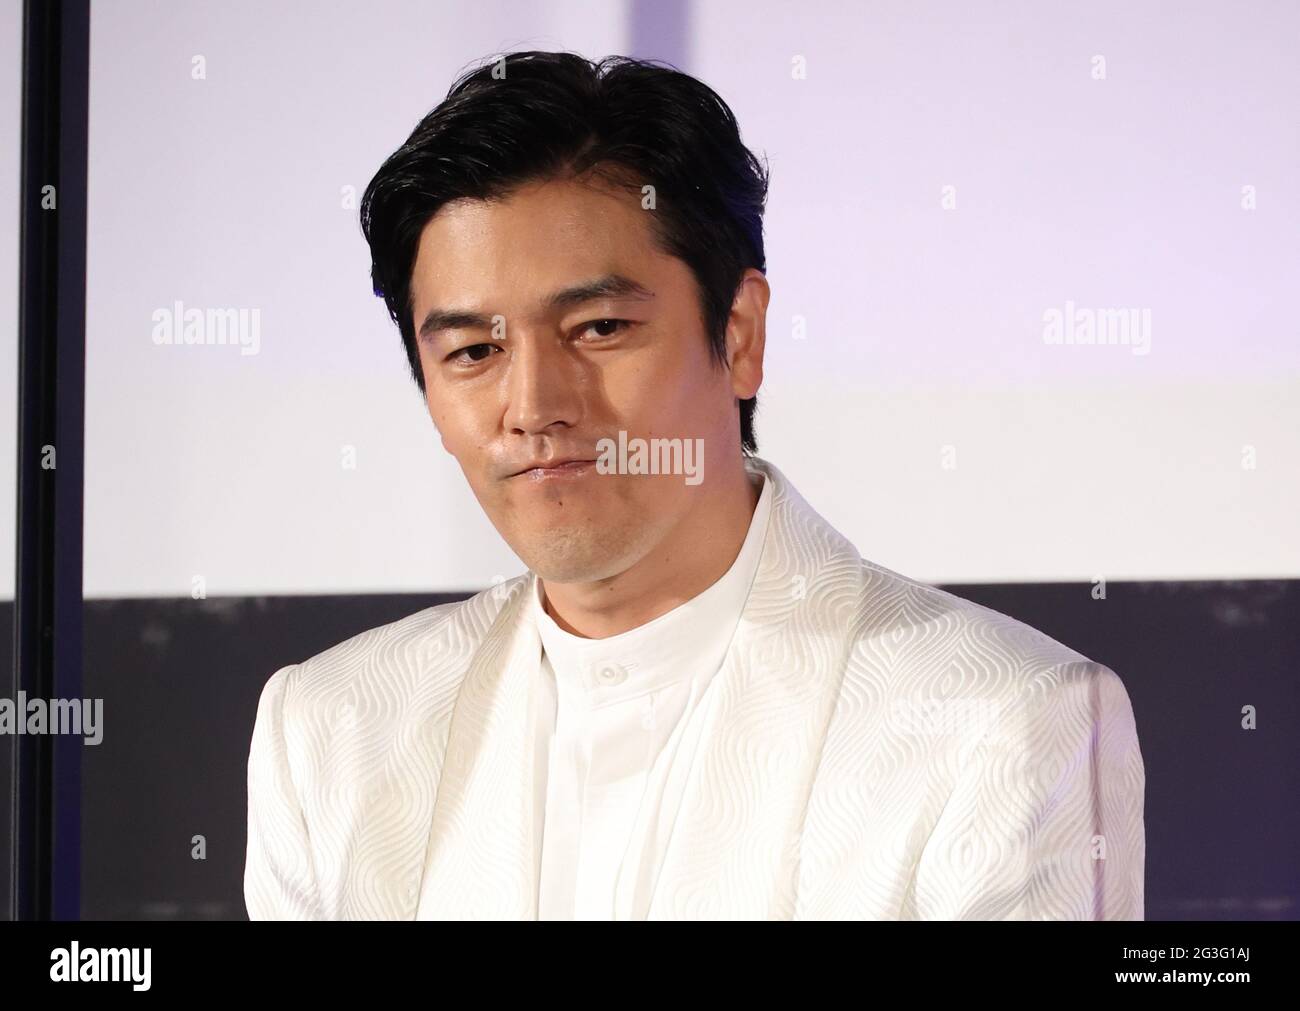 June 16, 2021, Tokyo, Japan - Japanese actor Jun Kaname attends the  awarding ceremony for branded short movies of the Short Shorts Film  Festival & Asia as a jury member in Tokyo